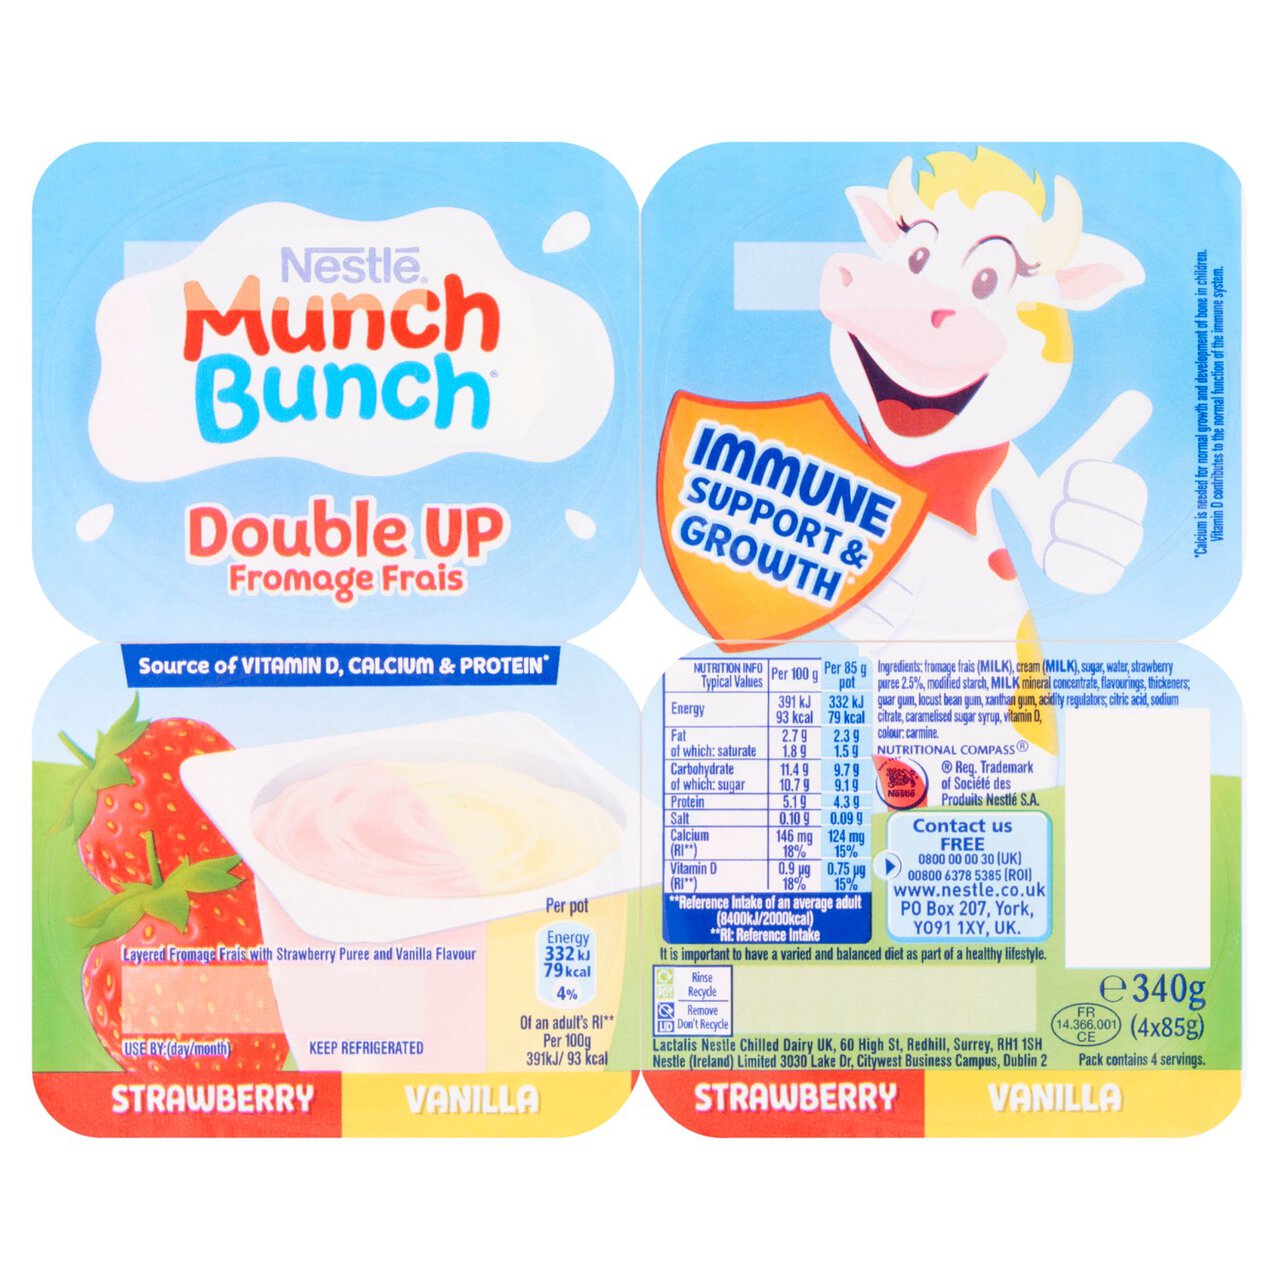 Munch Bunch Double Up Fromage Frais Strawberry & Vanilla 4 x 85g